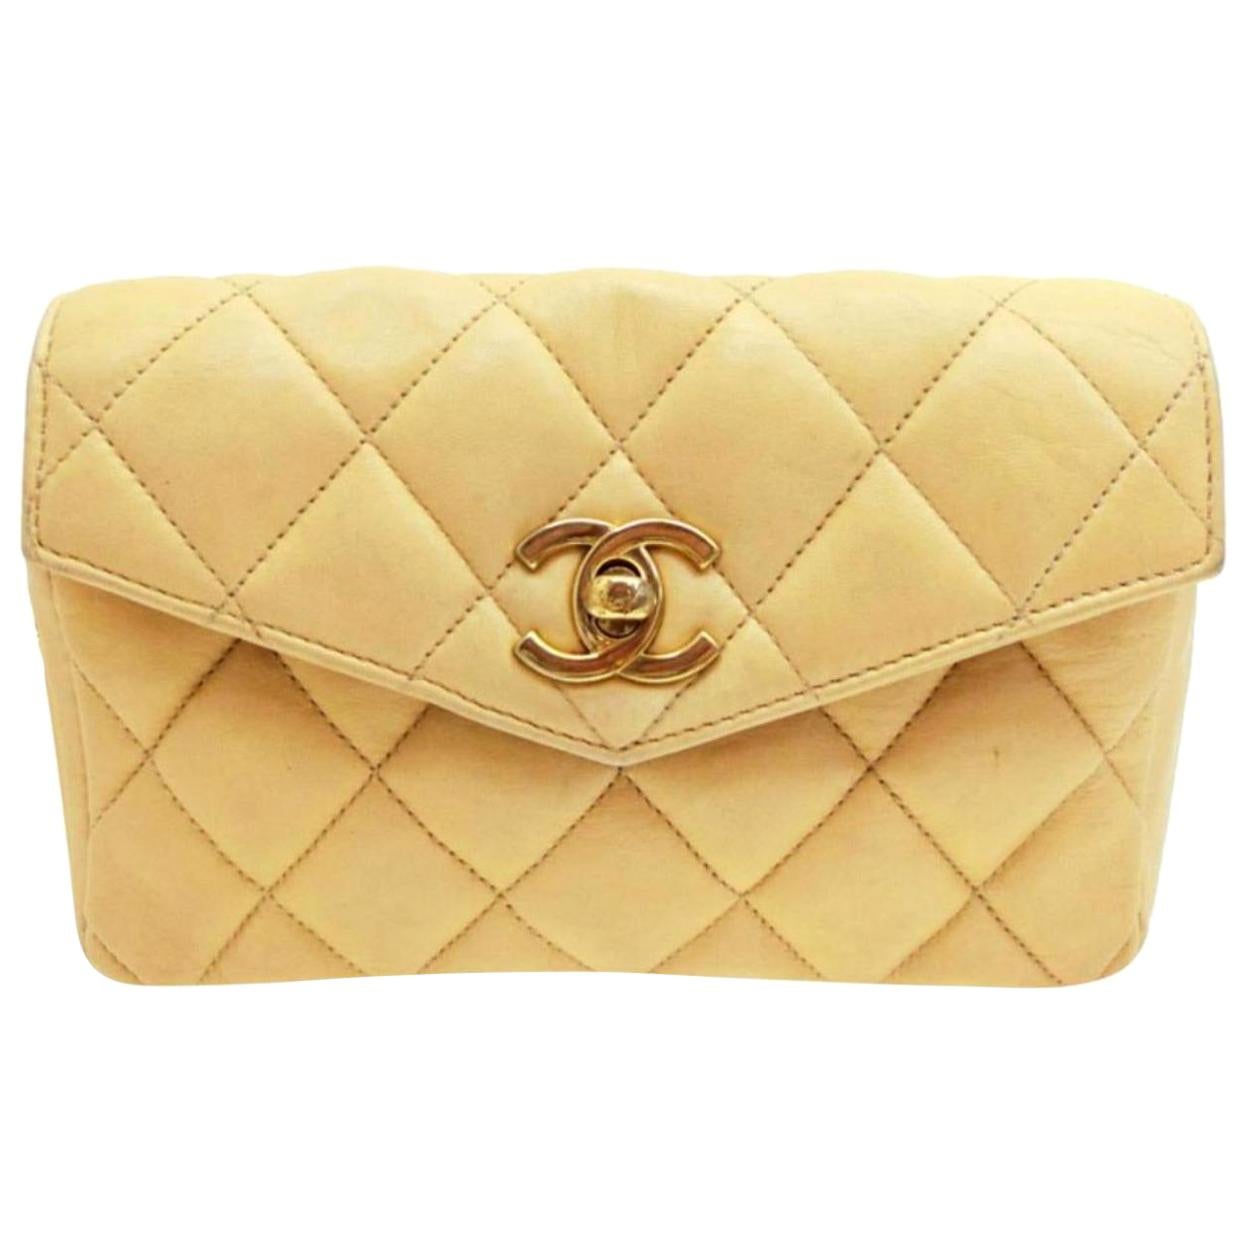 Chanel Waist Bag Quilted Fanny Pack 231225 Beige Leather Cross Body Bag For Sale